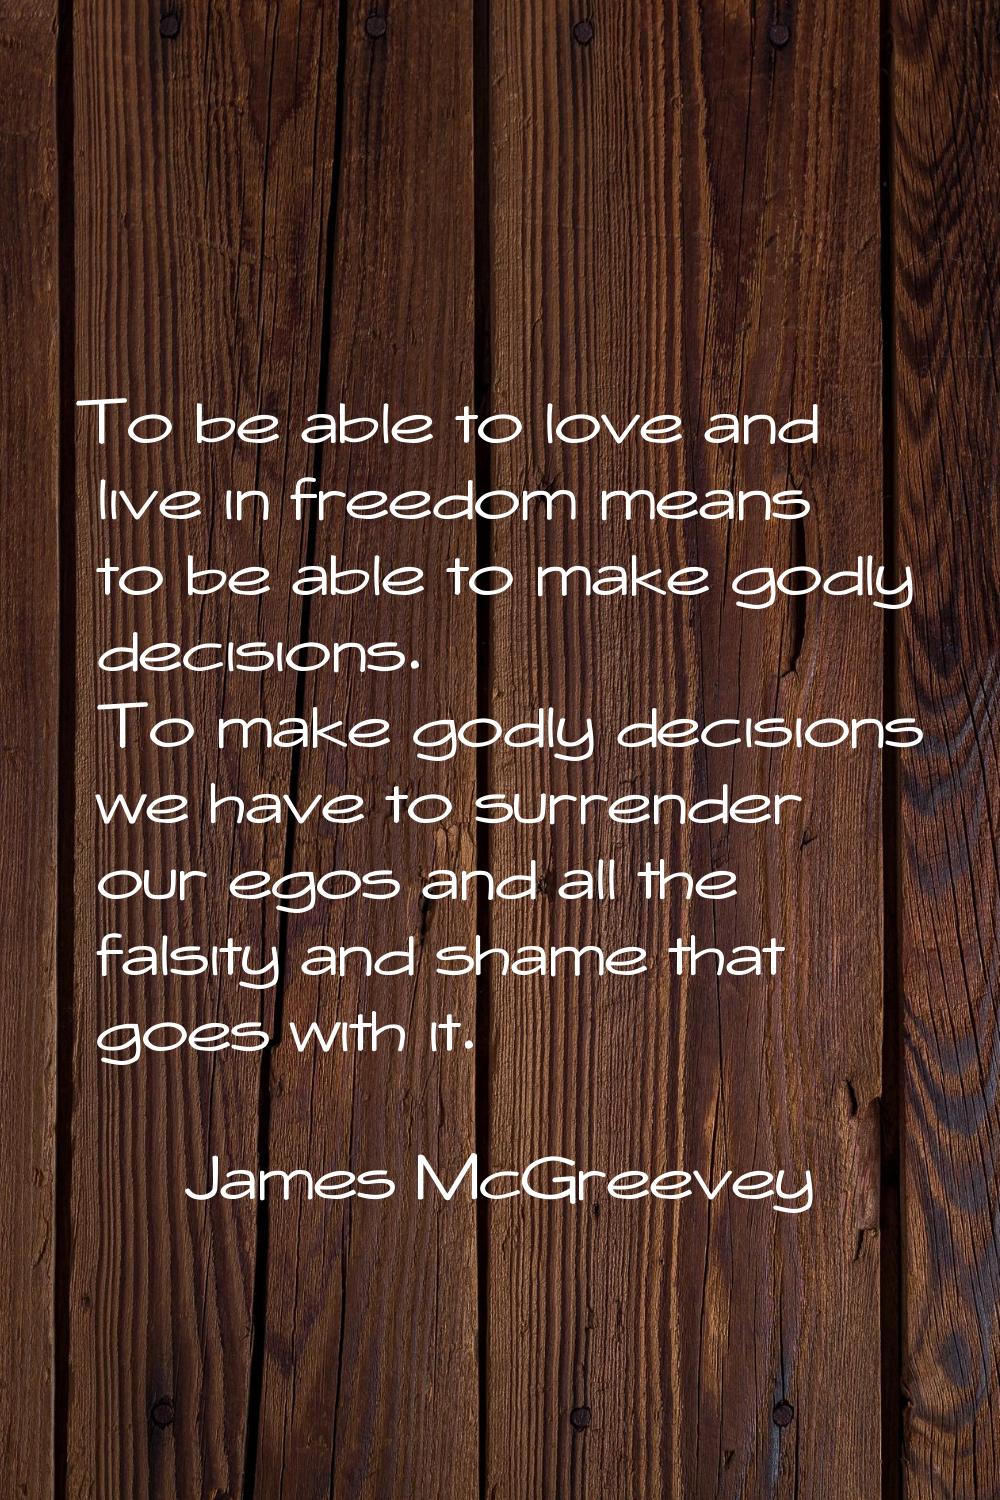 To be able to love and live in freedom means to be able to make godly decisions. To make godly deci